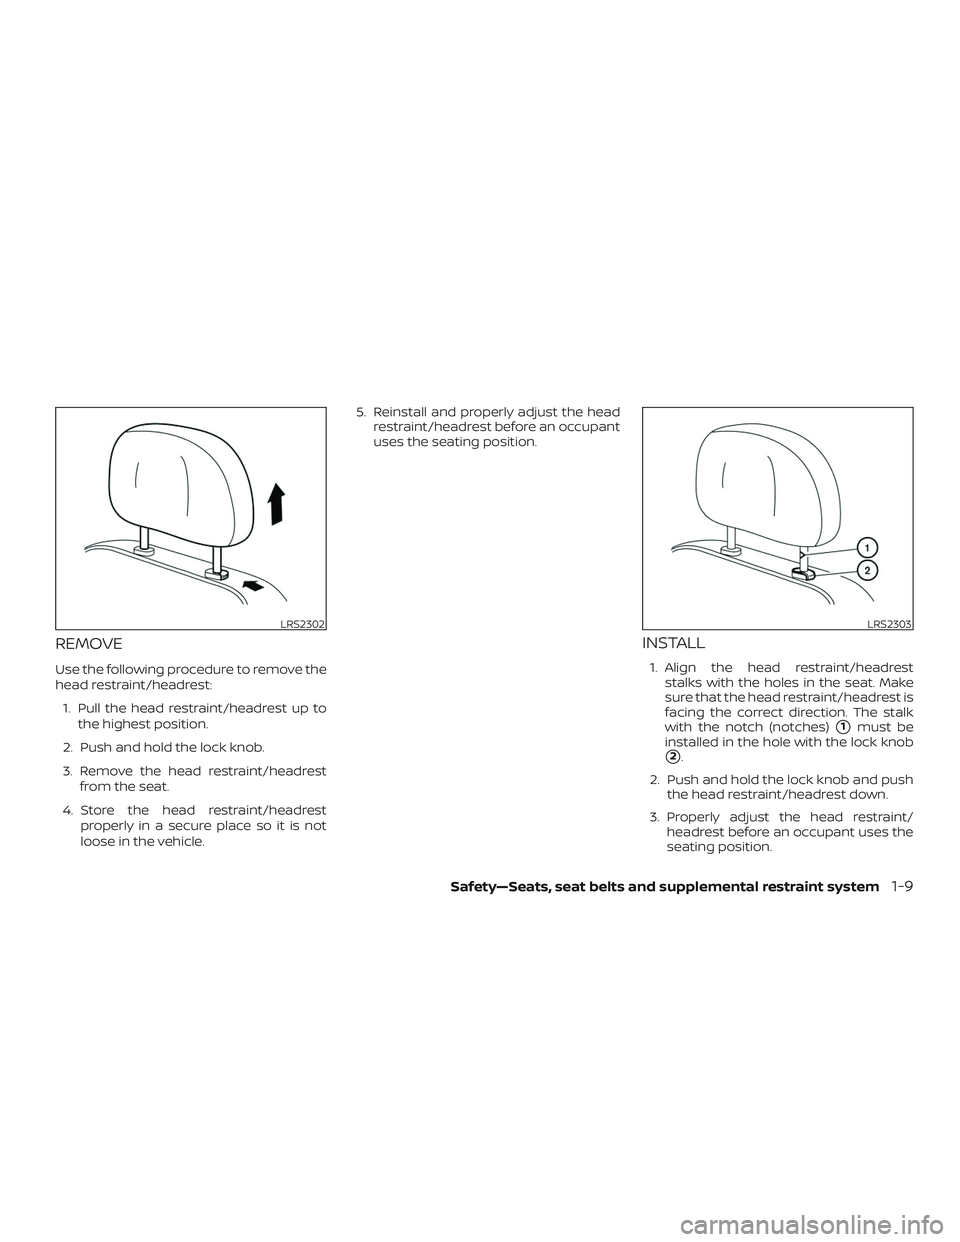 NISSAN MAXIMA 2020  Owner´s Manual REMOVE
Use the following procedure to remove the
head restraint/headrest:1. Pull the head restraint/headrest up to the highest position.
2. Push and hold the lock knob.
3. Remove the head restraint/he